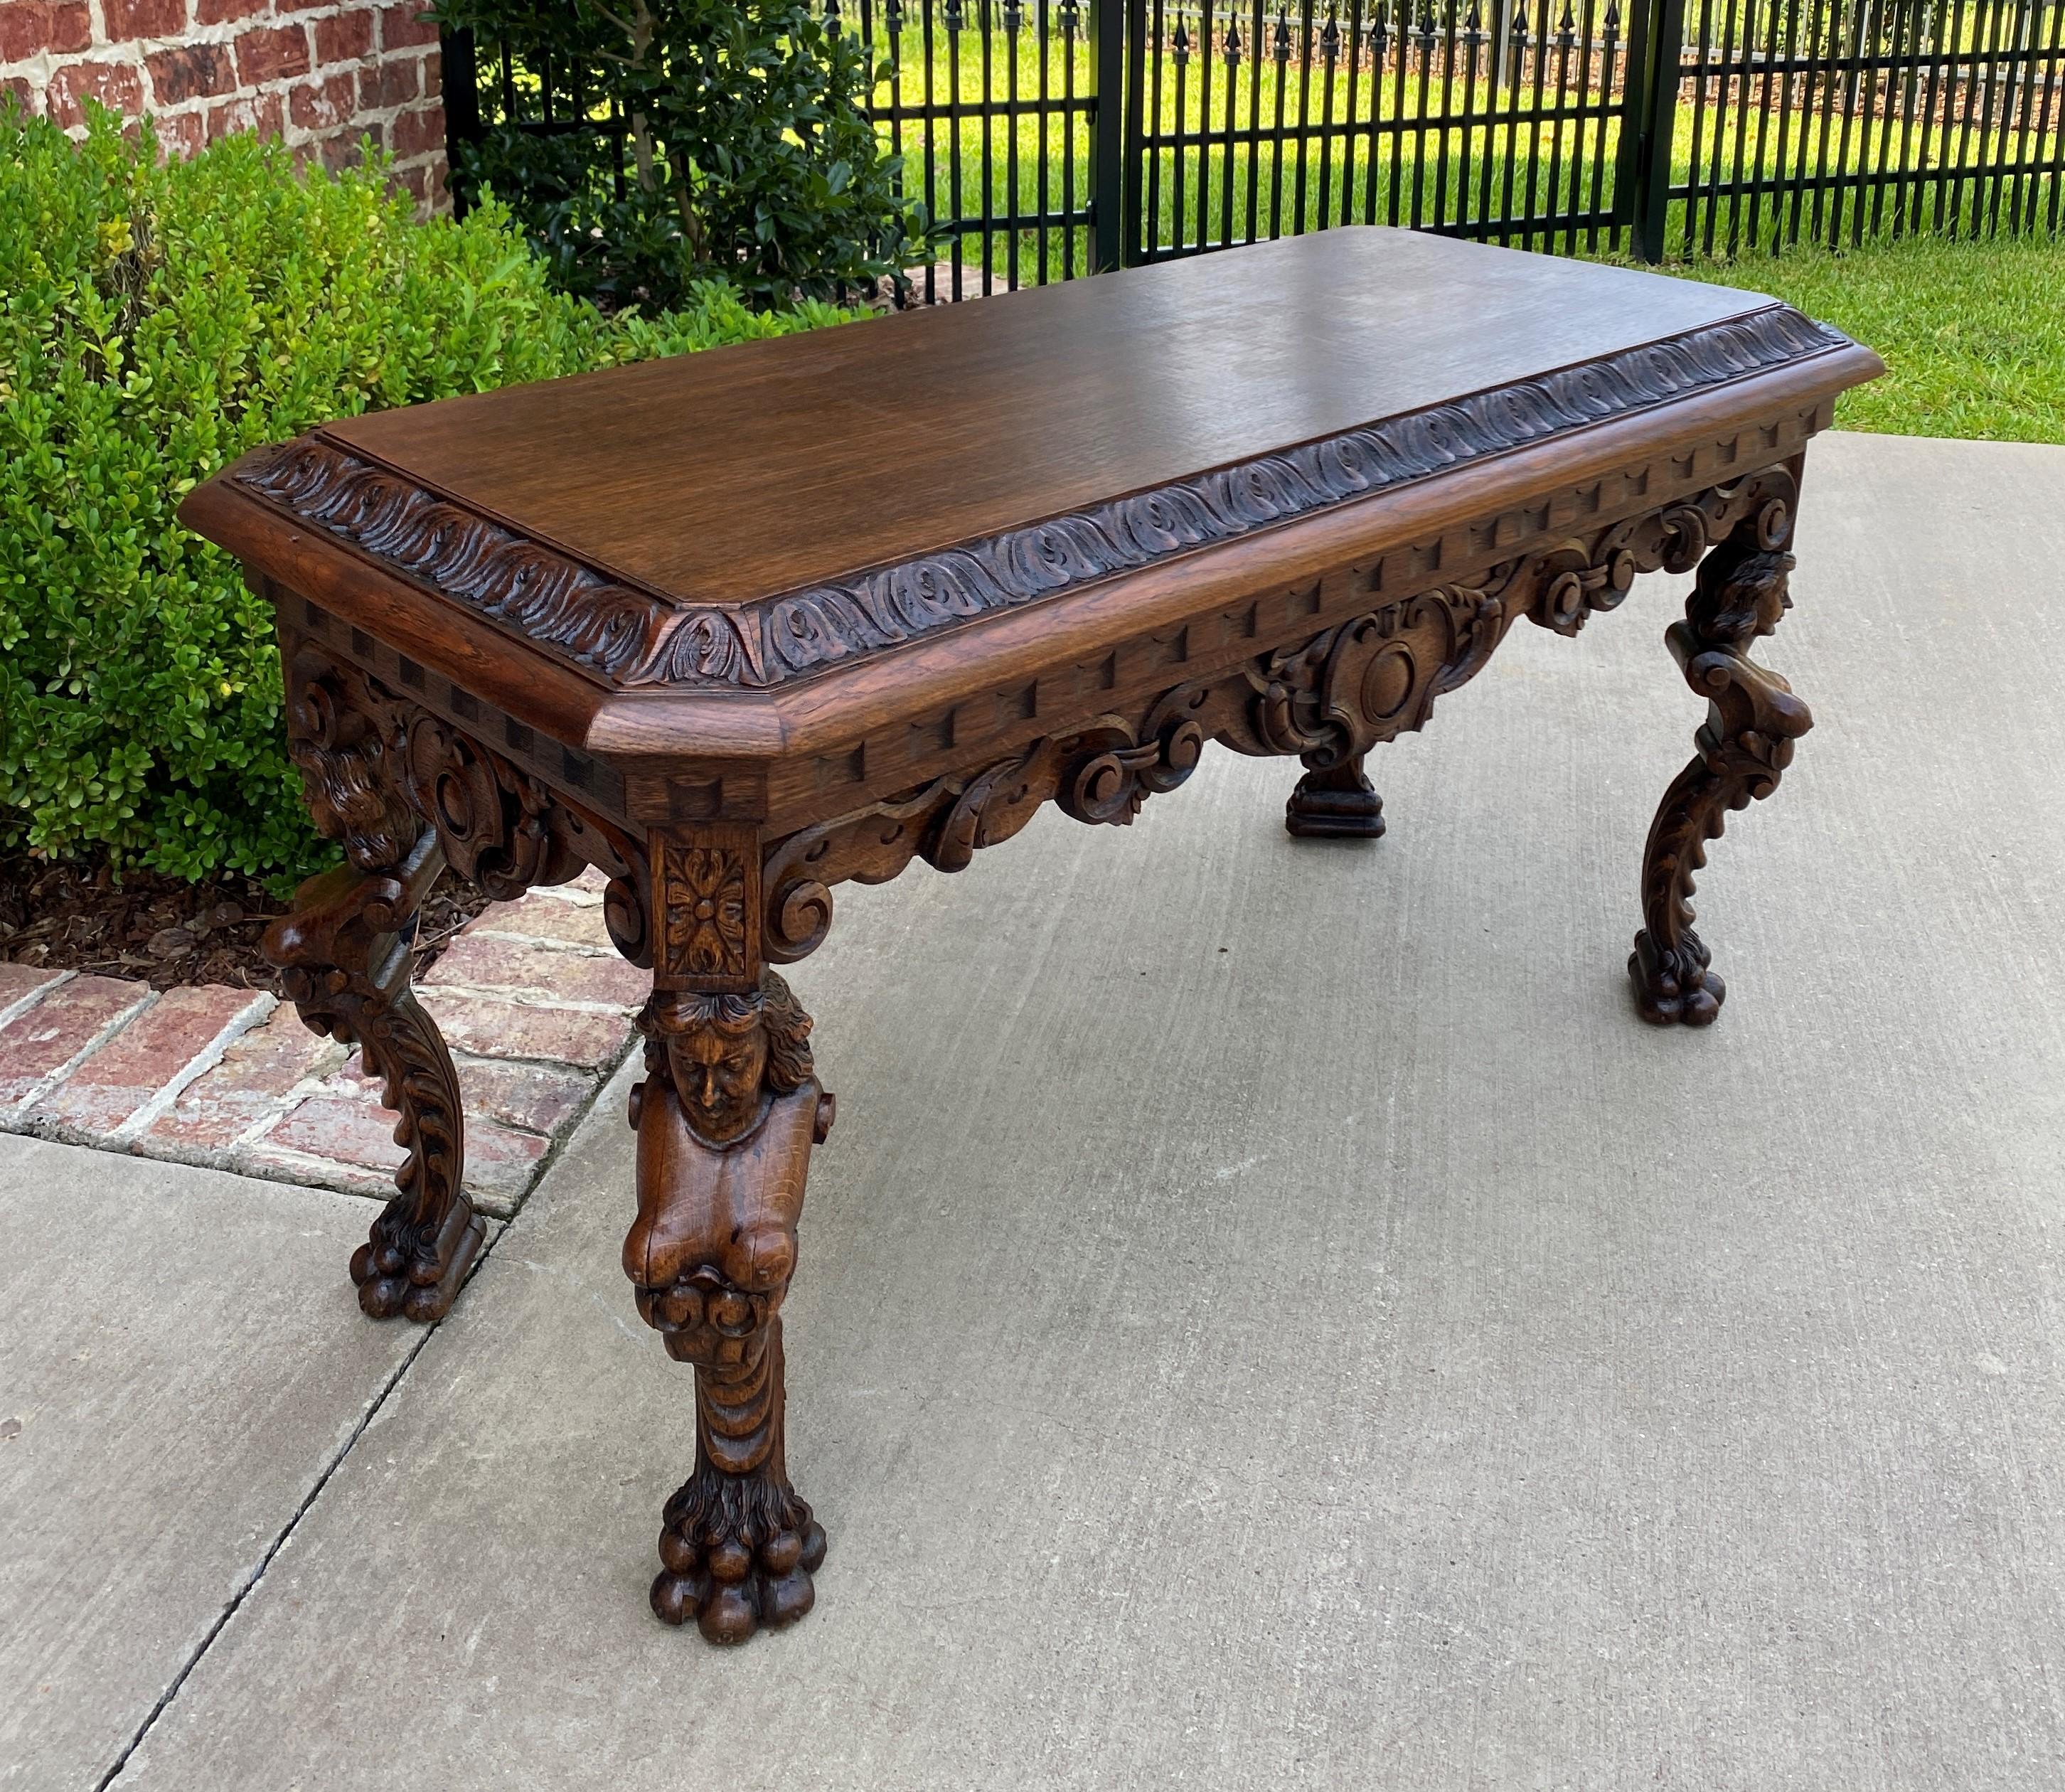 RARE Antique French Carved Oak Renaissance Revival coffee table or bench~~c.1900- 1920s

Beautifully carved and impossible to find~~scrolled figural supports with hairy paw feet~~wonderful apron or skirt with French flourish~~raised beveled edge